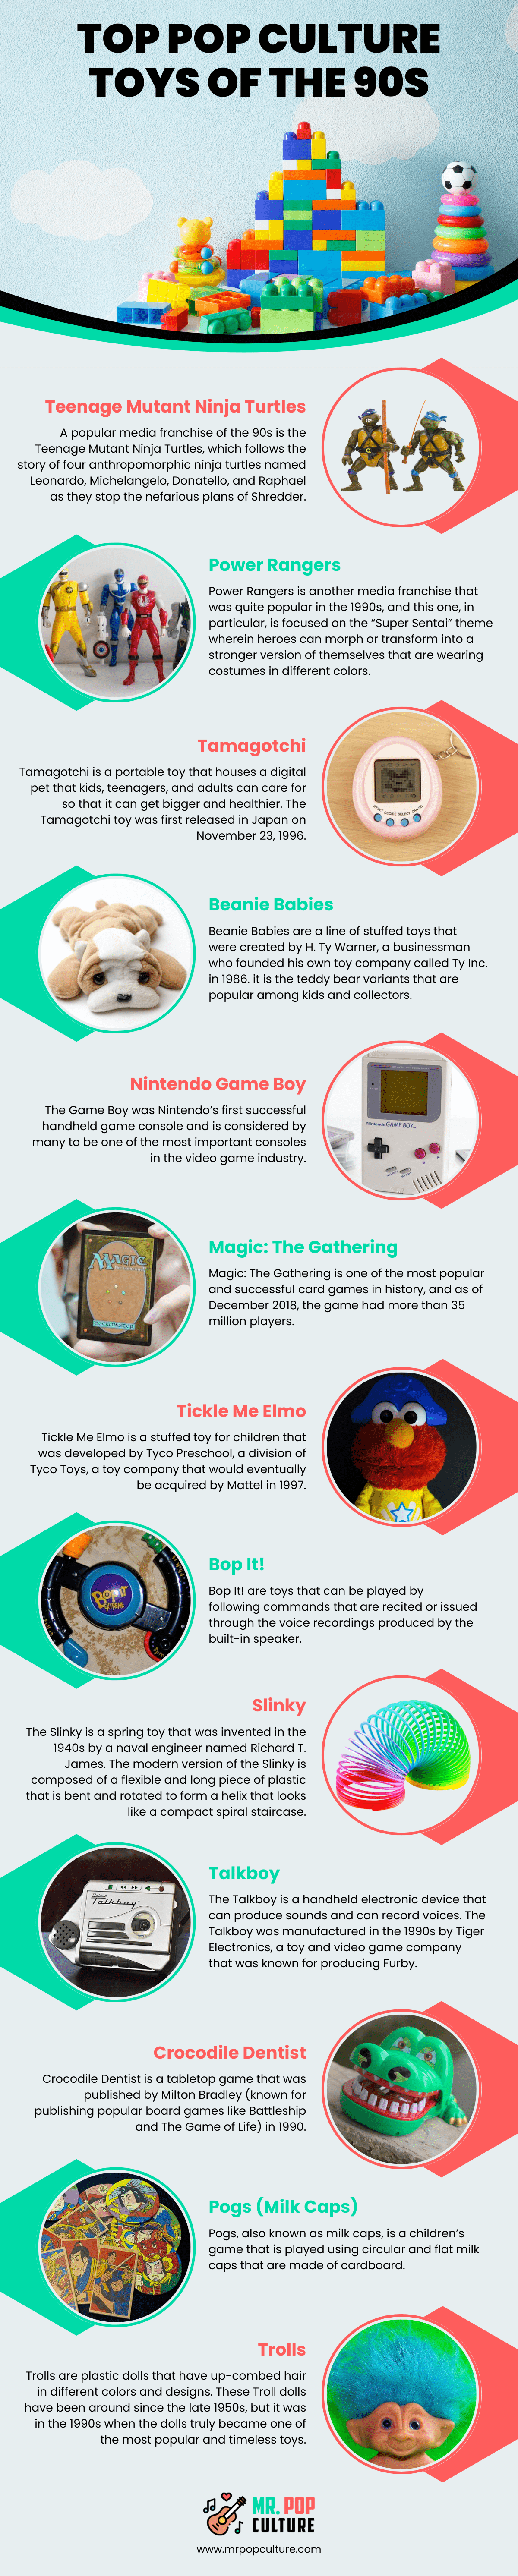 Top Pop Culture Toys of the 90s